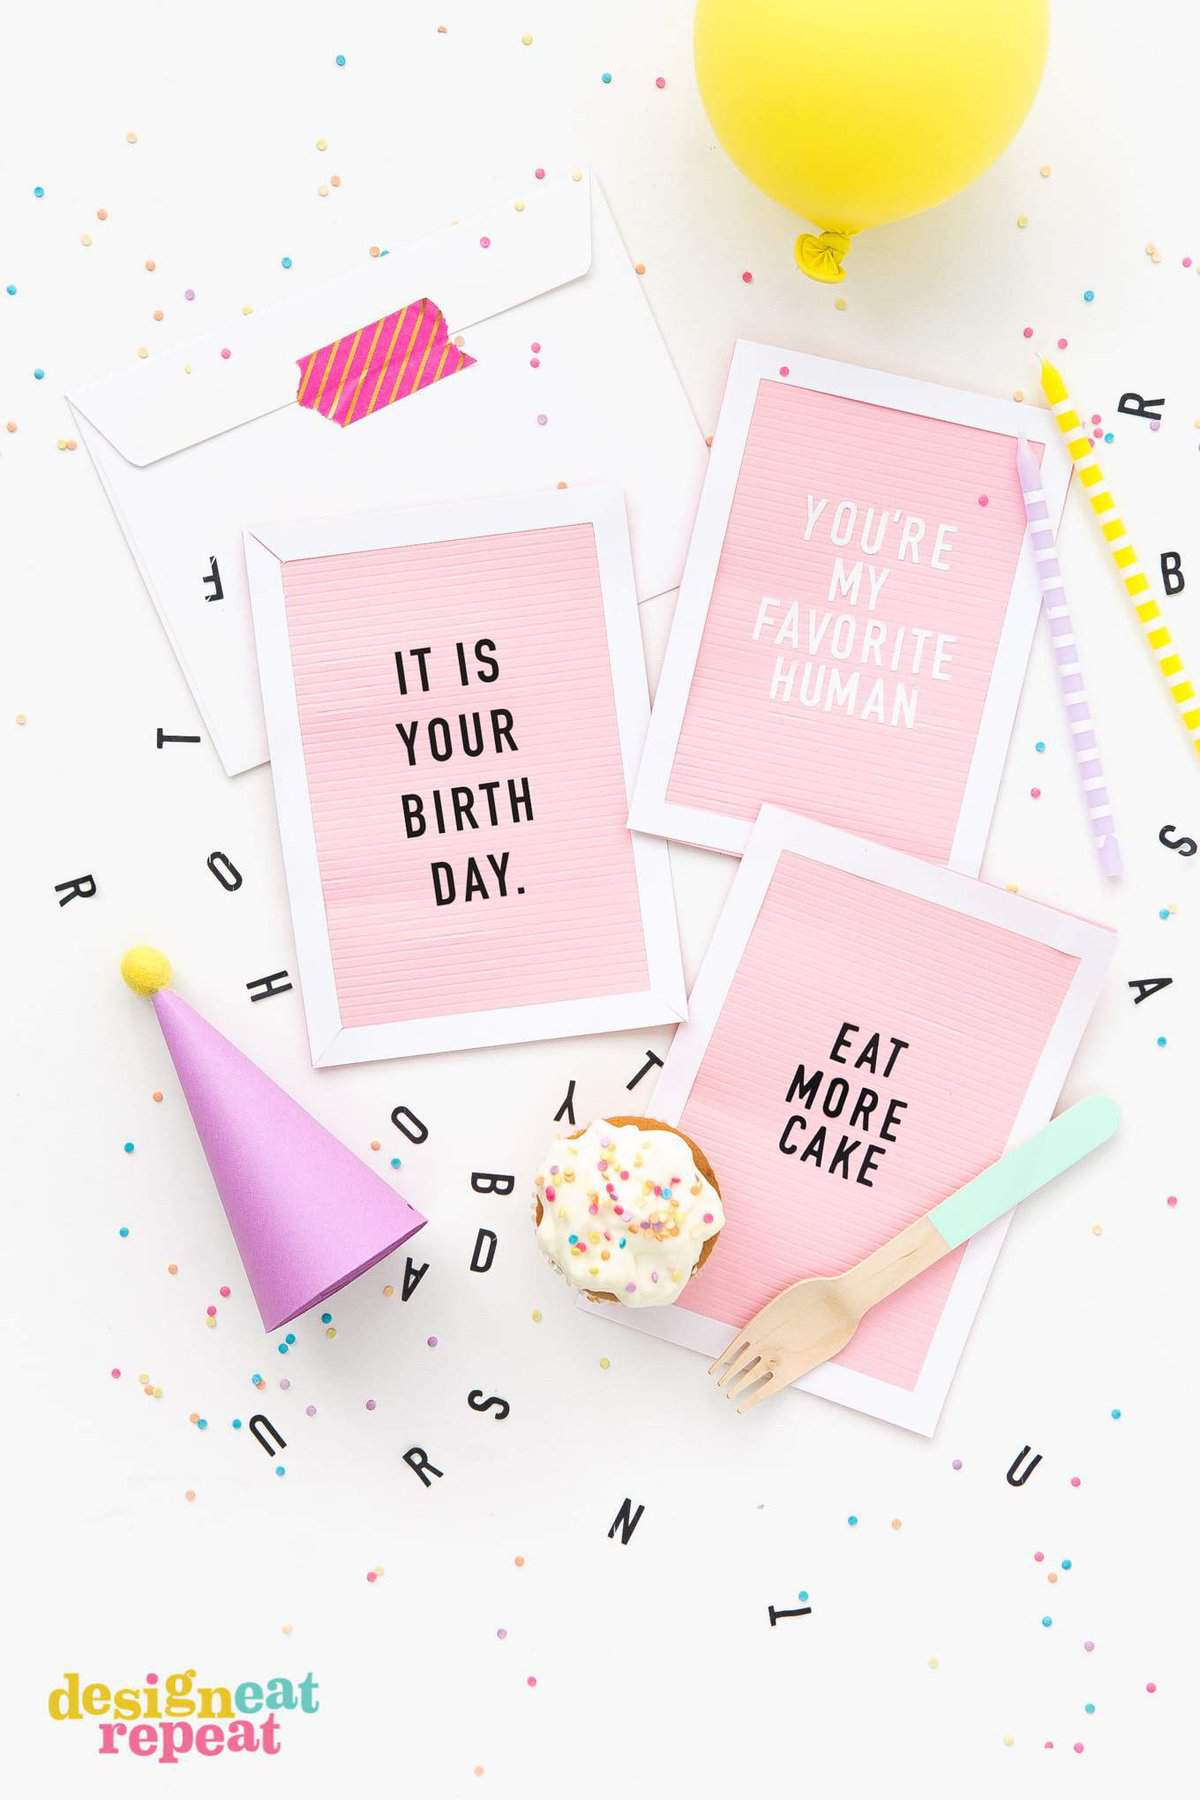 Bring the letterboard trend to your craft room with these Letterboard DIY Birthday Cards! Customize with your own phrases and slip in an envelope for a fun & creative handmade birthday card! | www.DesignEatRepeat.com | #birthdaycard #printable